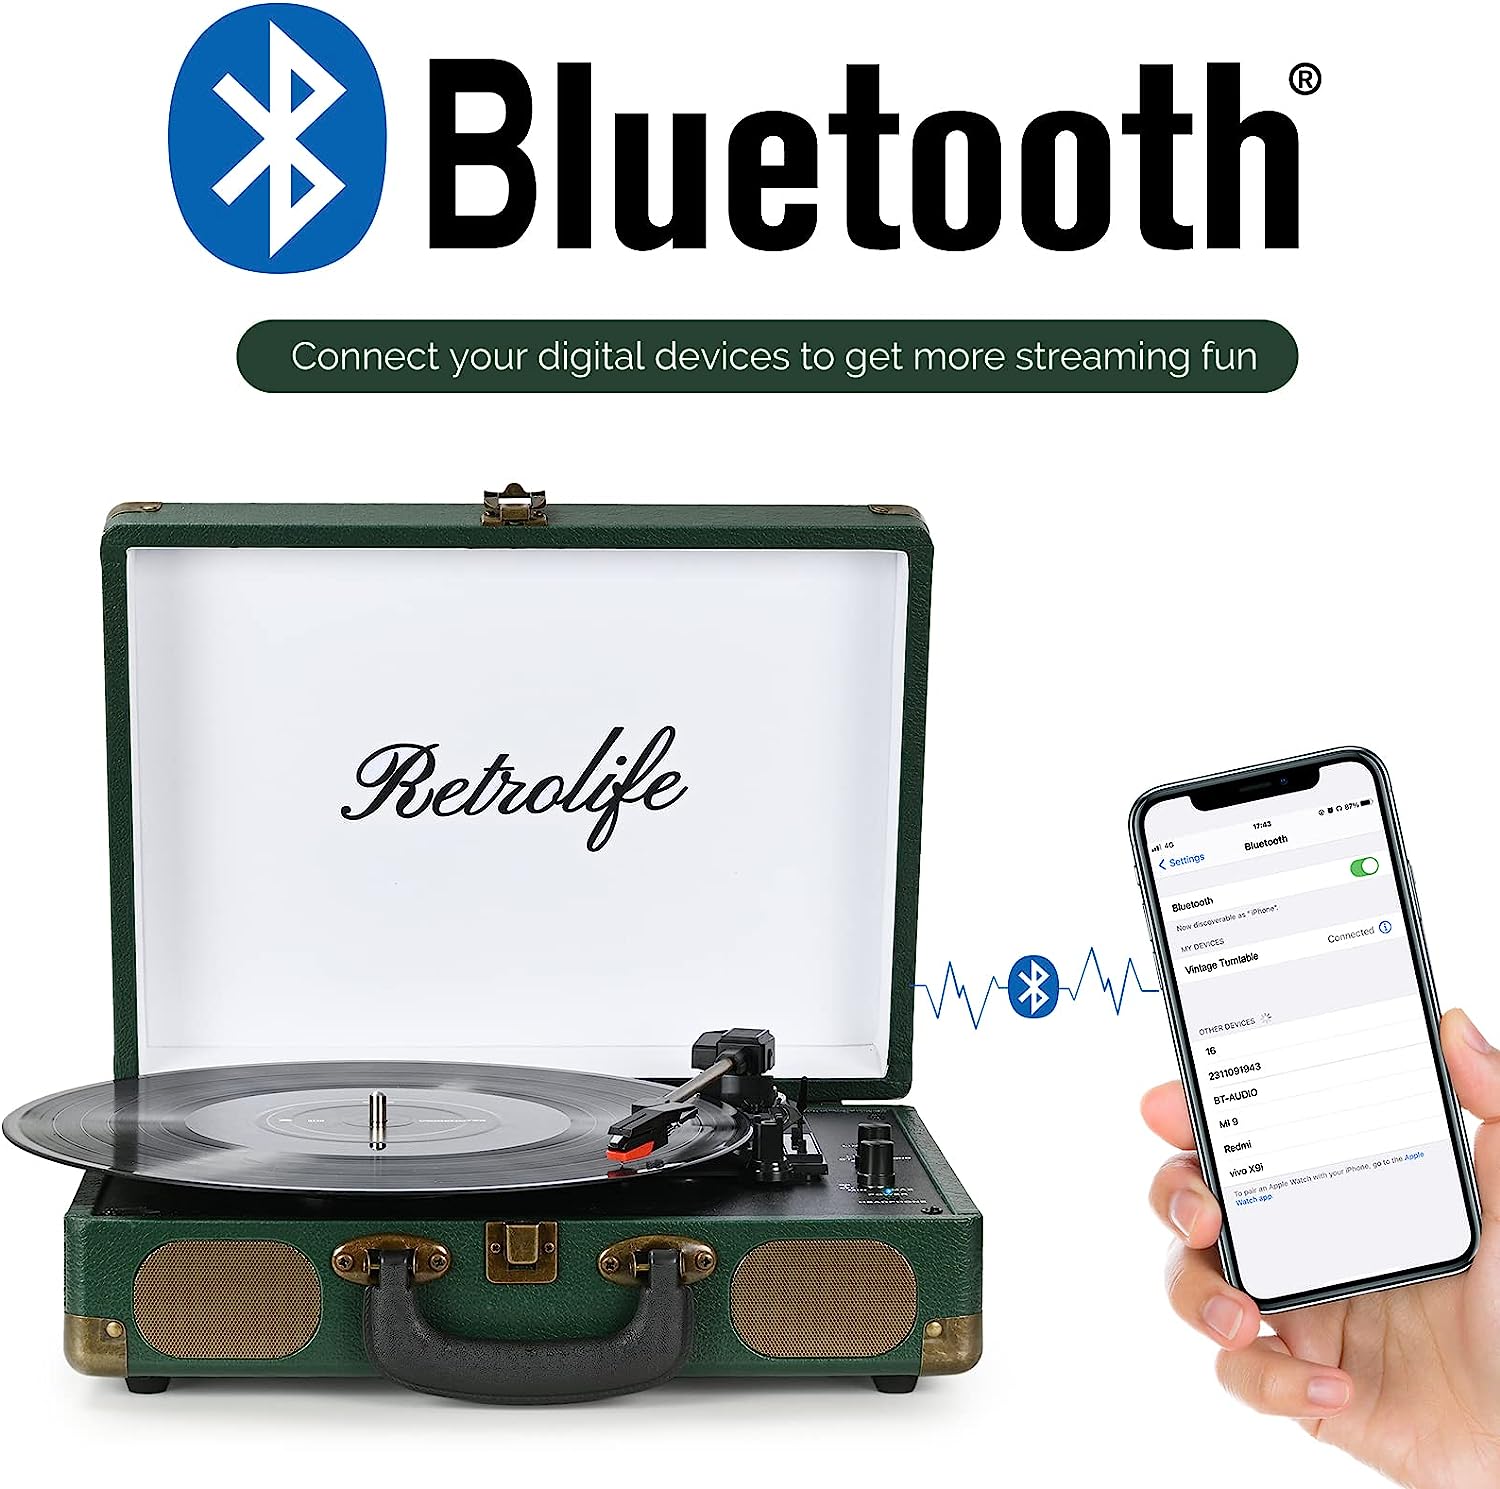 Vinyl Record Player 3-Speed Bluetooth Suitcase Portable Belt-Driven Report Player with Built-in Speakers RCA Line Out AUX in Headphone Jack Vintage Turntable